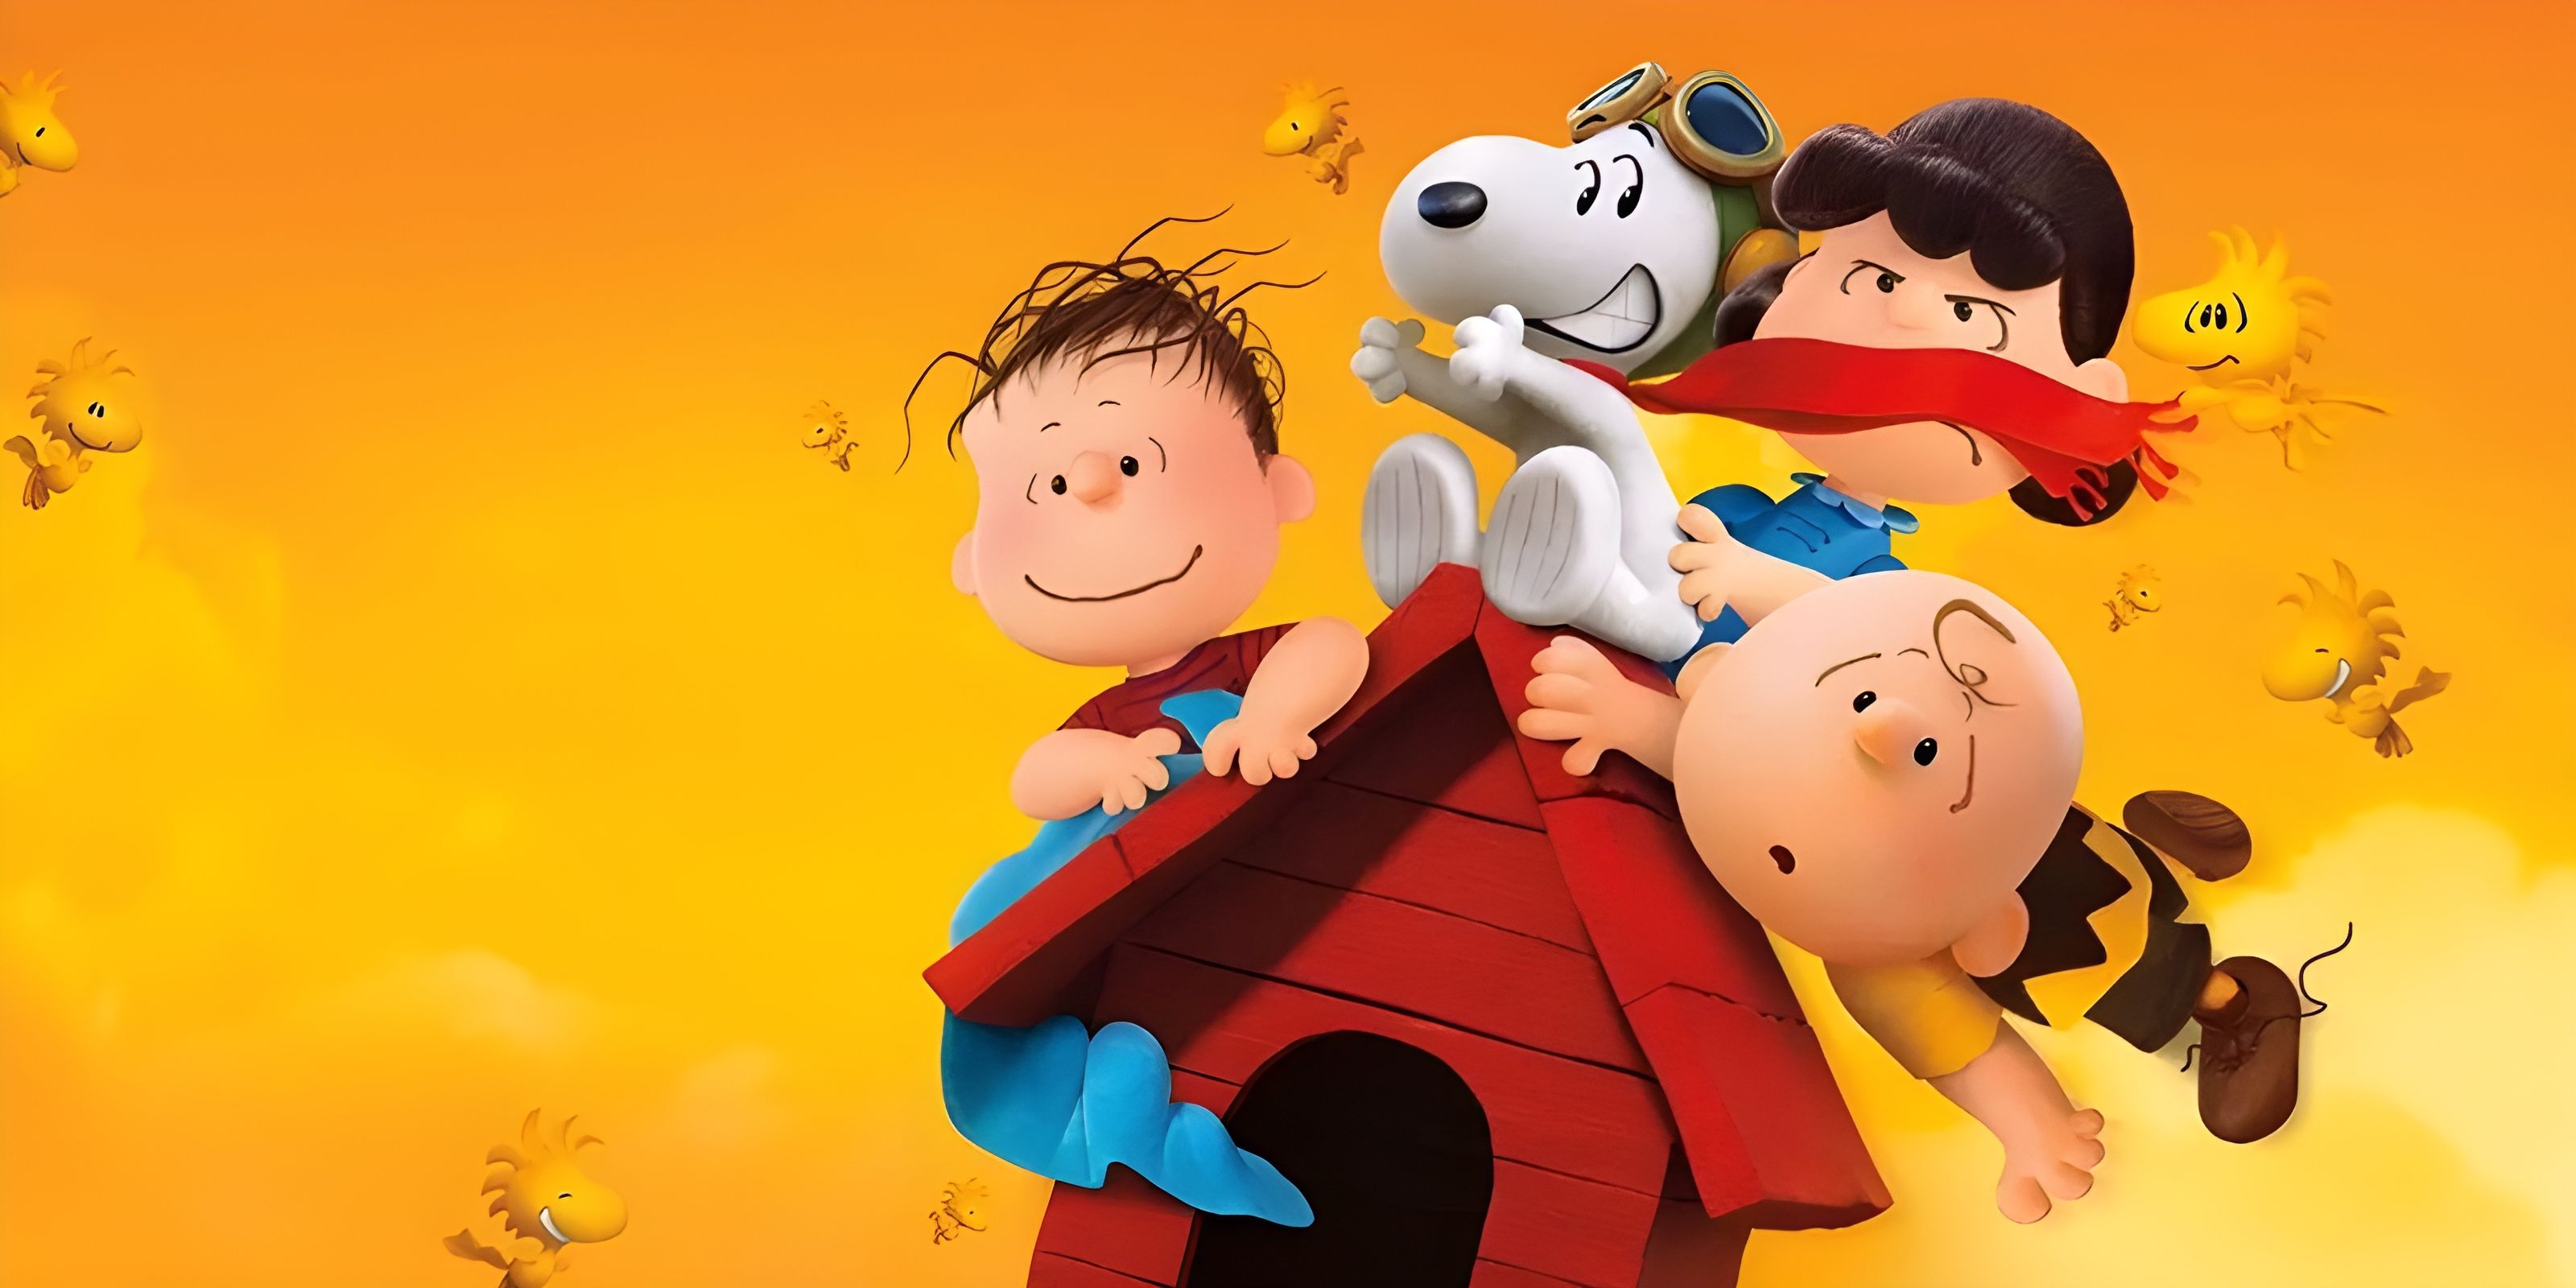 Apple to Debut Original Animation Film Featuring 'Peanuts' Gang in Big City Quest